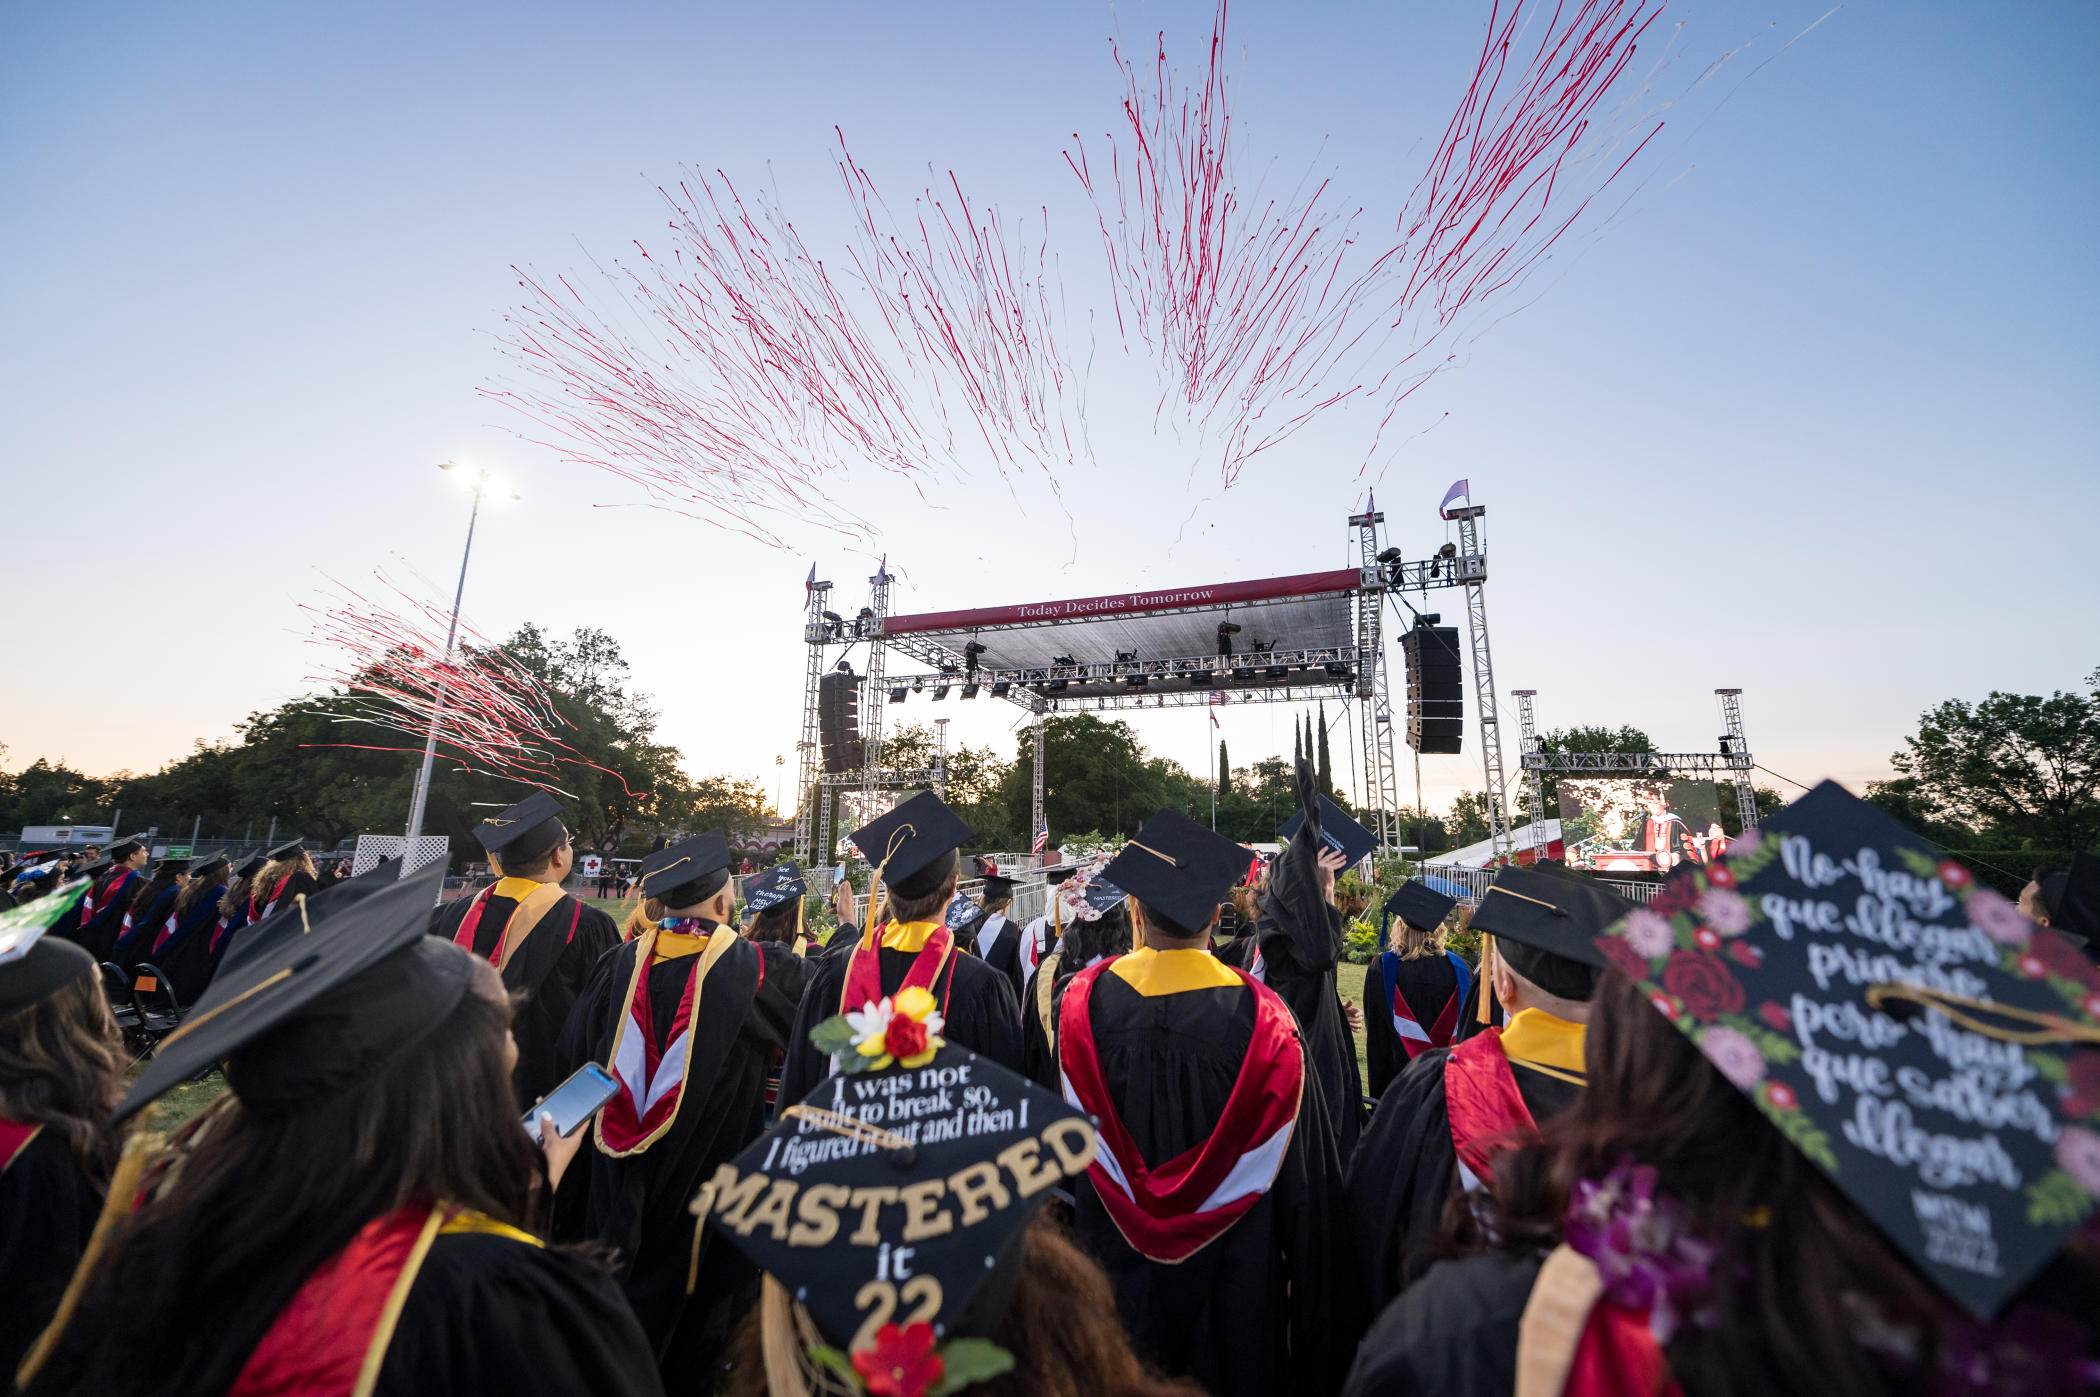 Streamers shoot from atop a stage during an evening Commencement ceremony